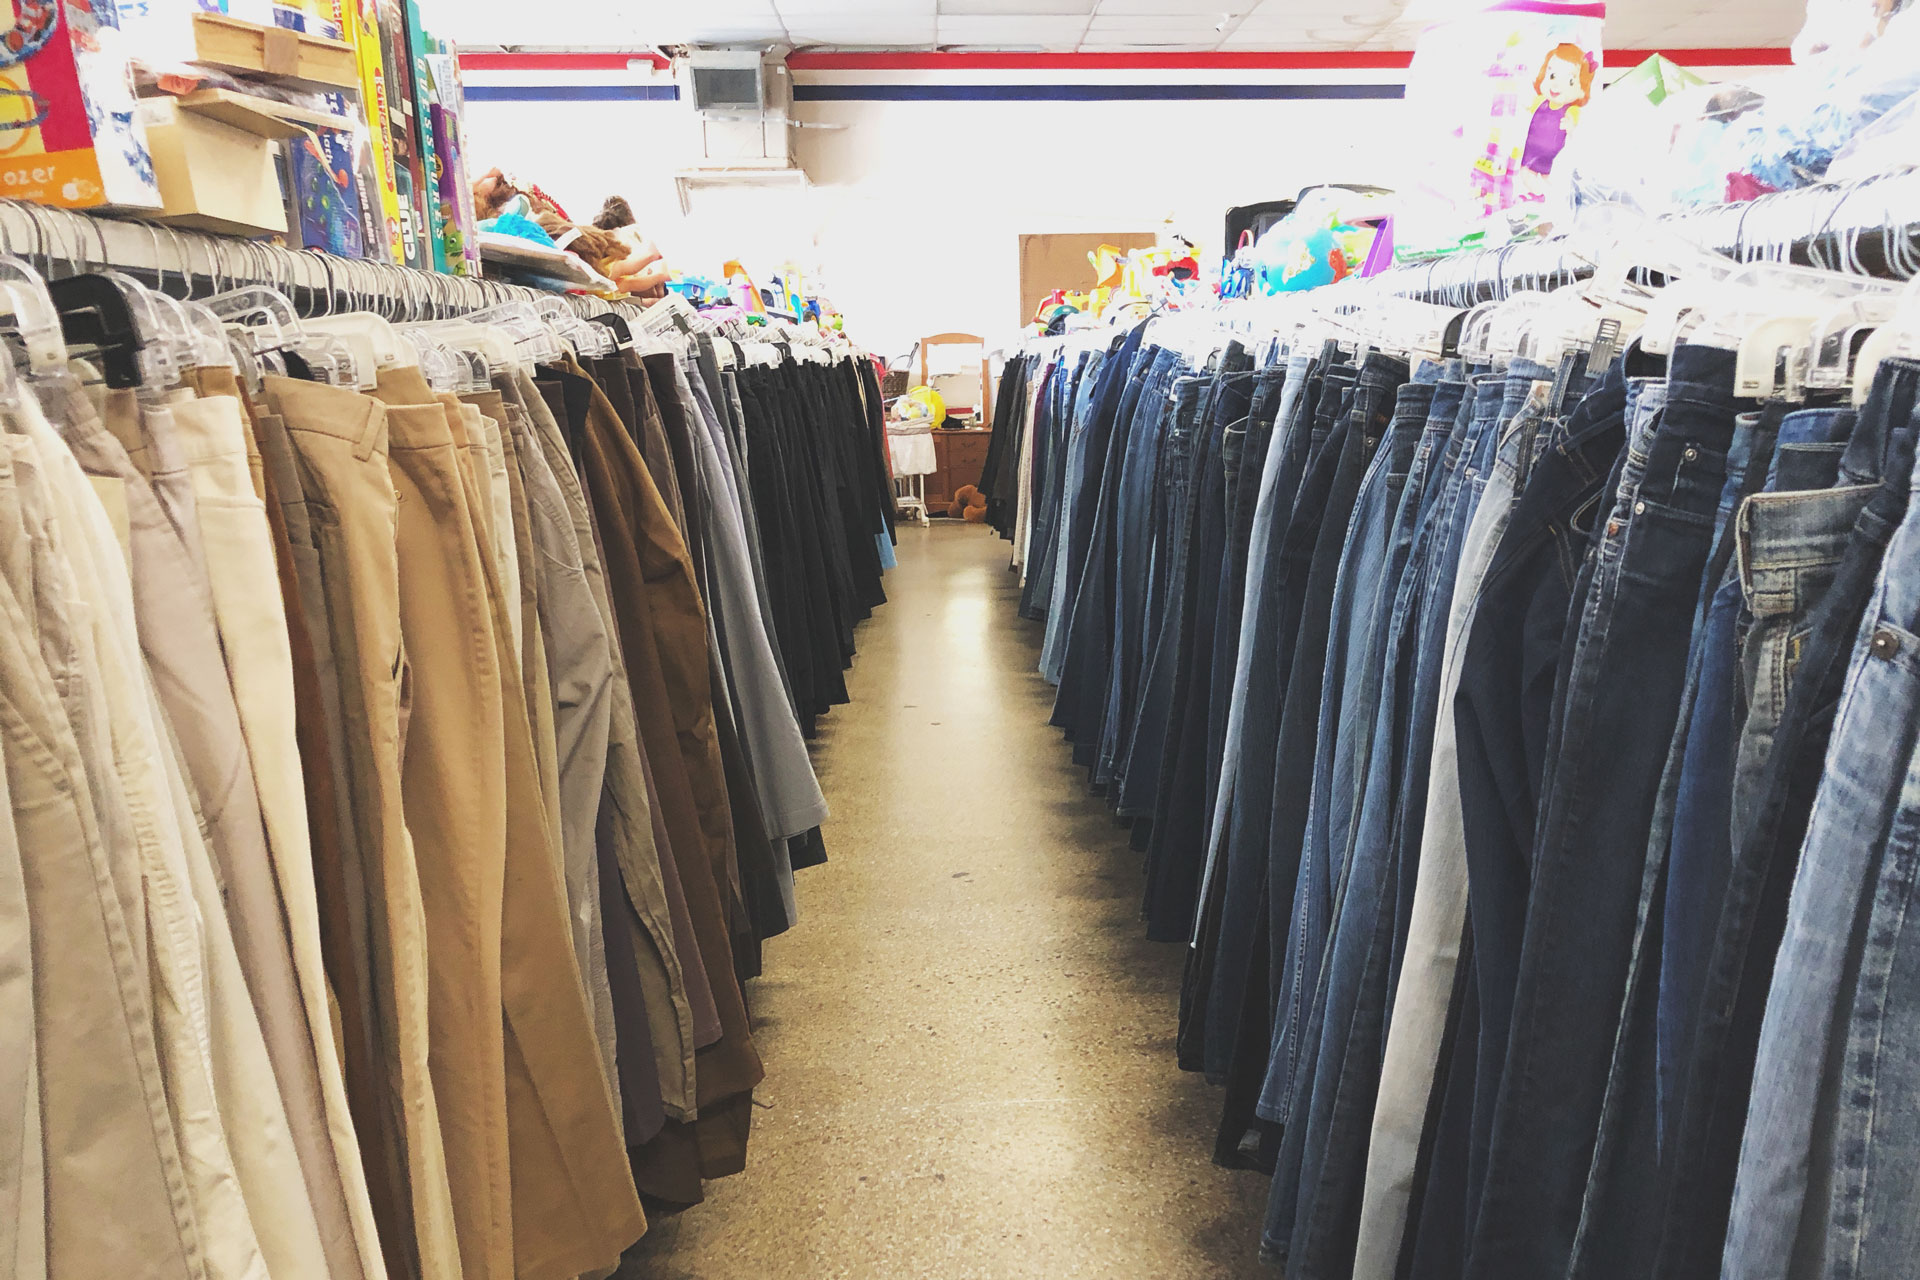 secondhand shopping, burbank, los angeles, thrift stores, thrift shops, secondhand shops, vintage